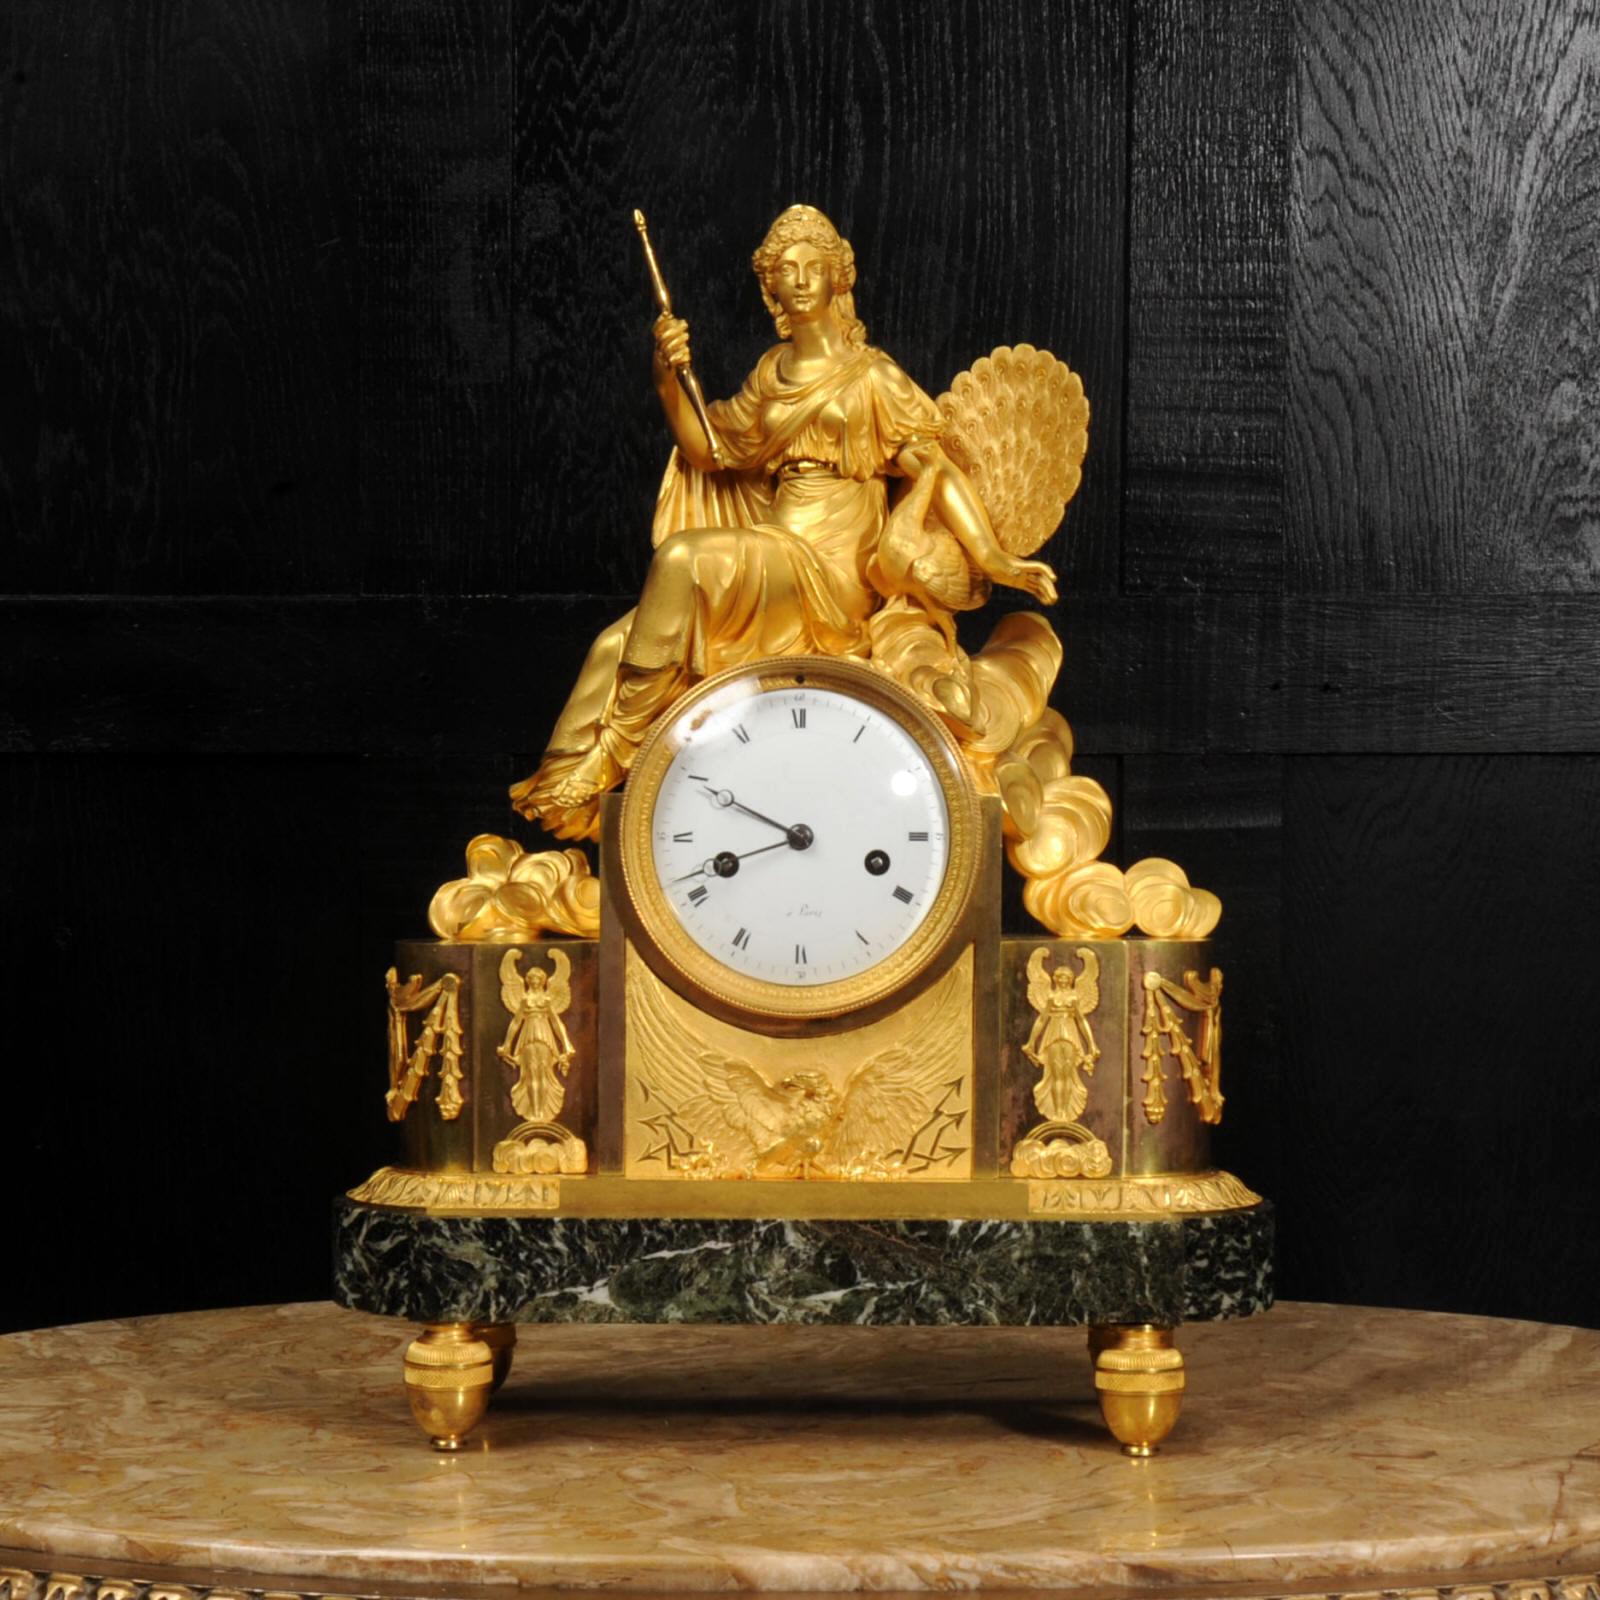 A rare and fine original antique French Empire clock featuring the goddess Juno. Beautifully made in sumptuous mercury fire gilded bronze, Juno is seated with a peacock amongst the clouds. The fine chasing and finishing of the bronze gives a